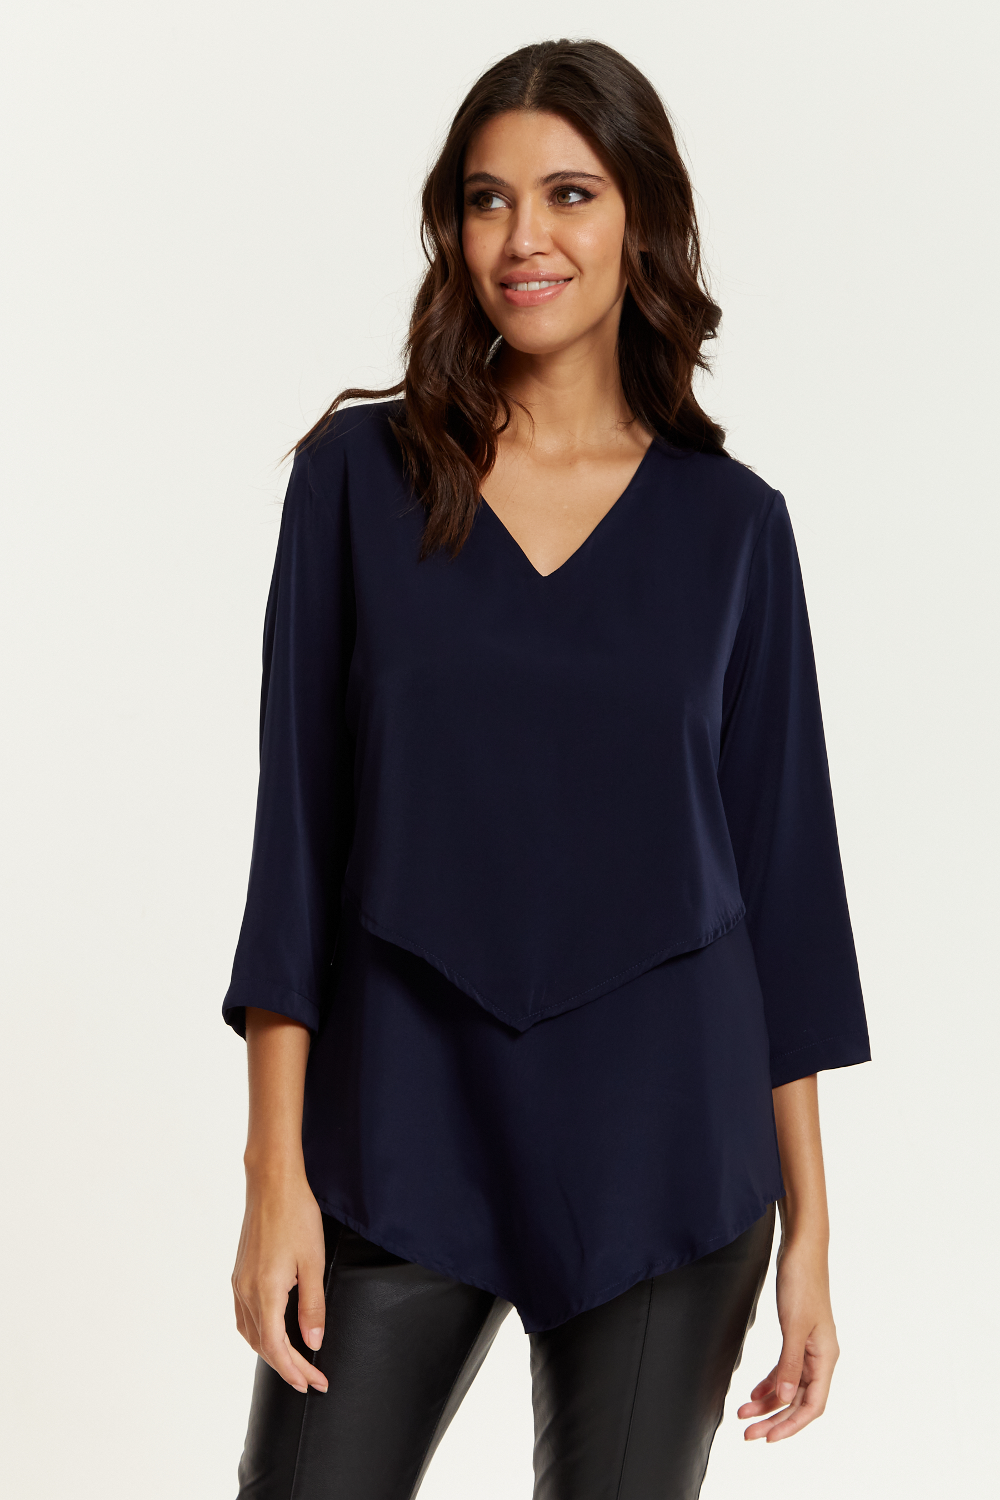 3/4 Sleeves V Neck Layered Relaxed Fit Top in Navy GLR FASHION NETWORKING